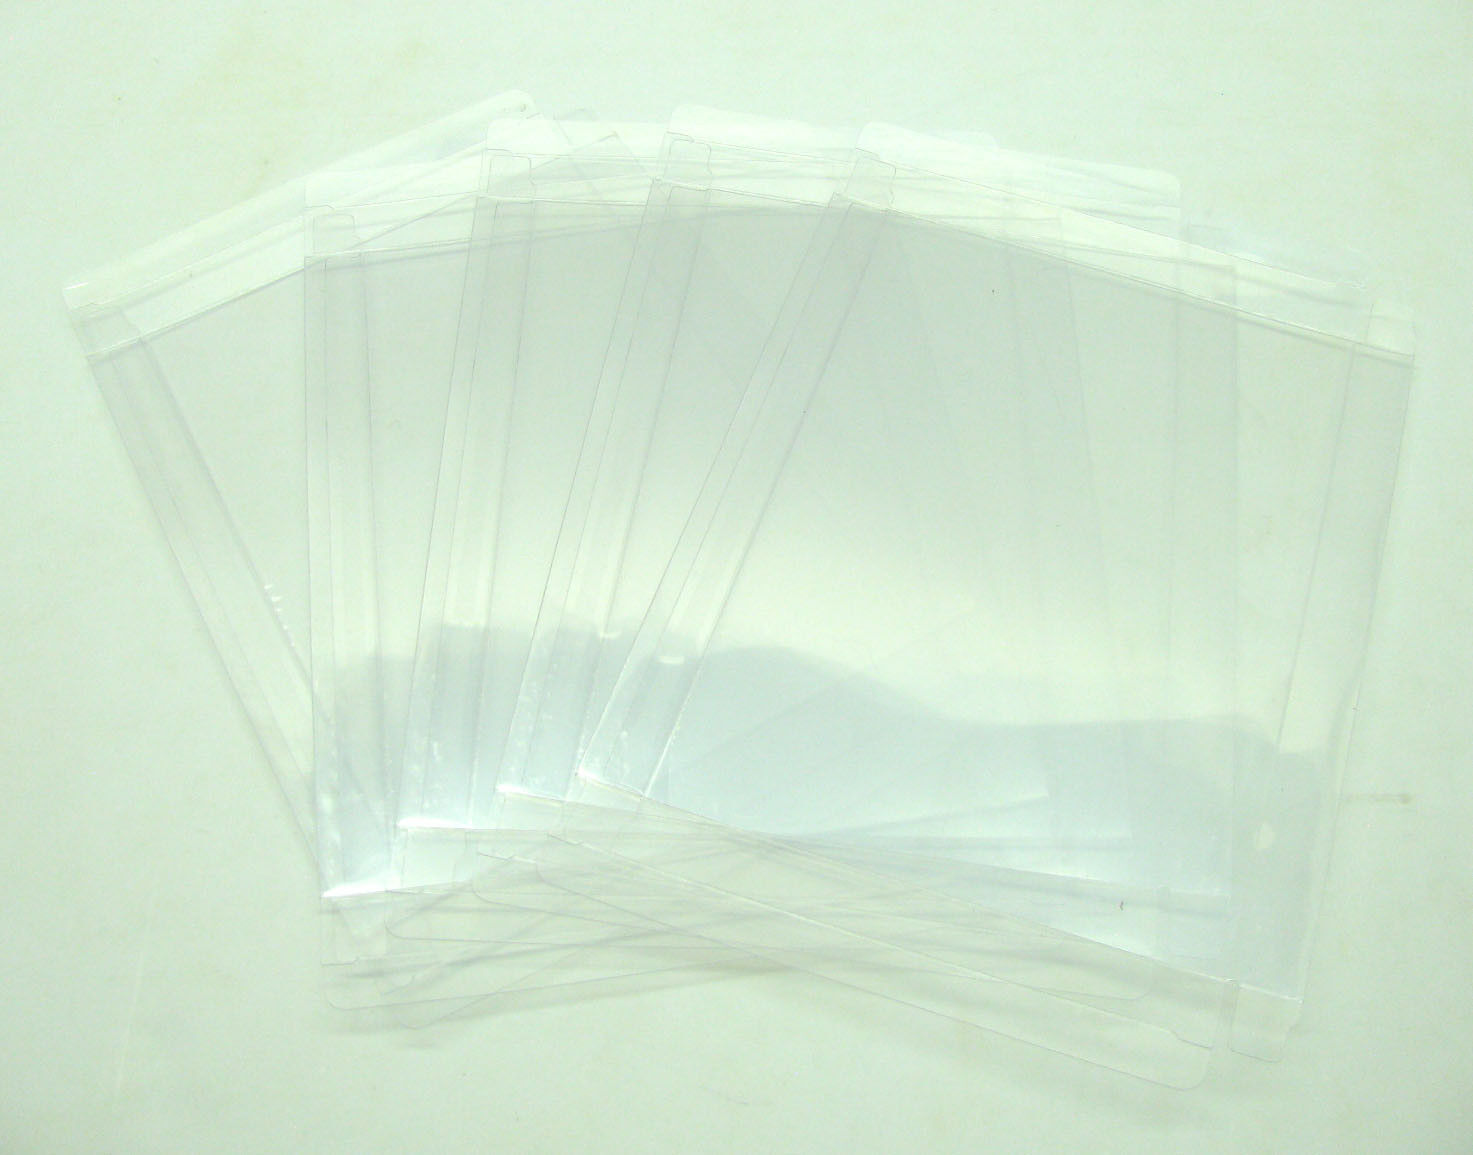 25x BLU-RAY STEELBOOK WITH J-CARDS (SIZE BR5) - CLEAR PLASTIC BOX PROTECTORS  Dr. Retro Does Not Apply - фотография #8